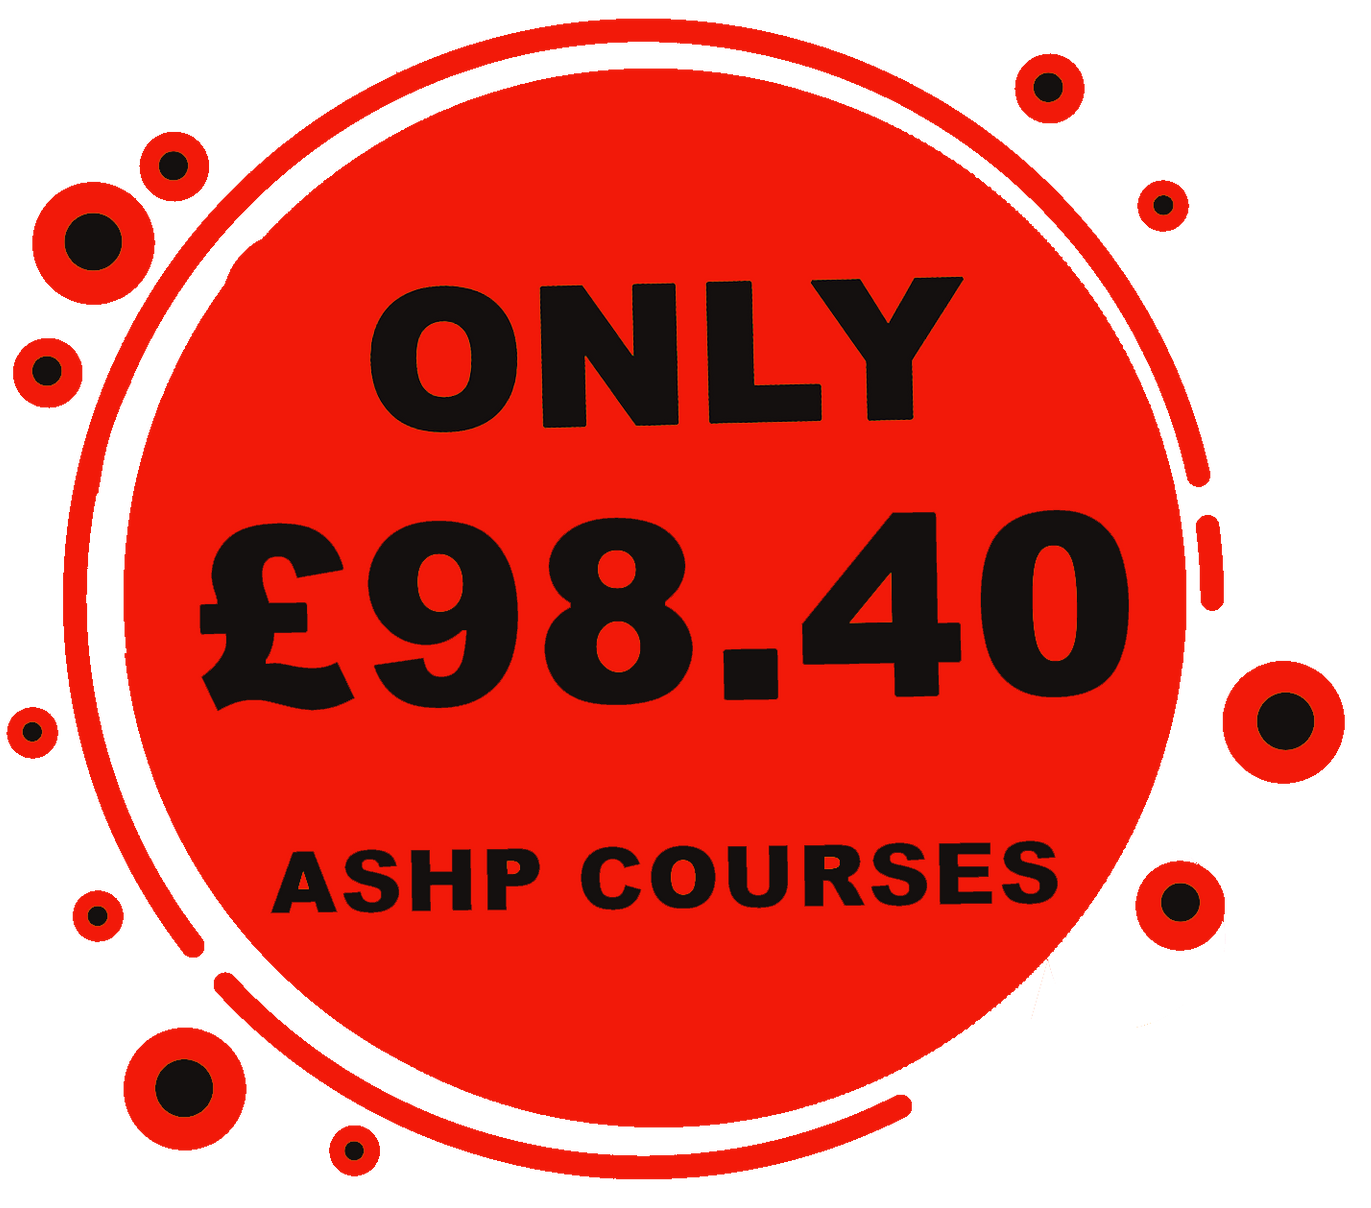 Air Source Heat Pump Courses only £98.40